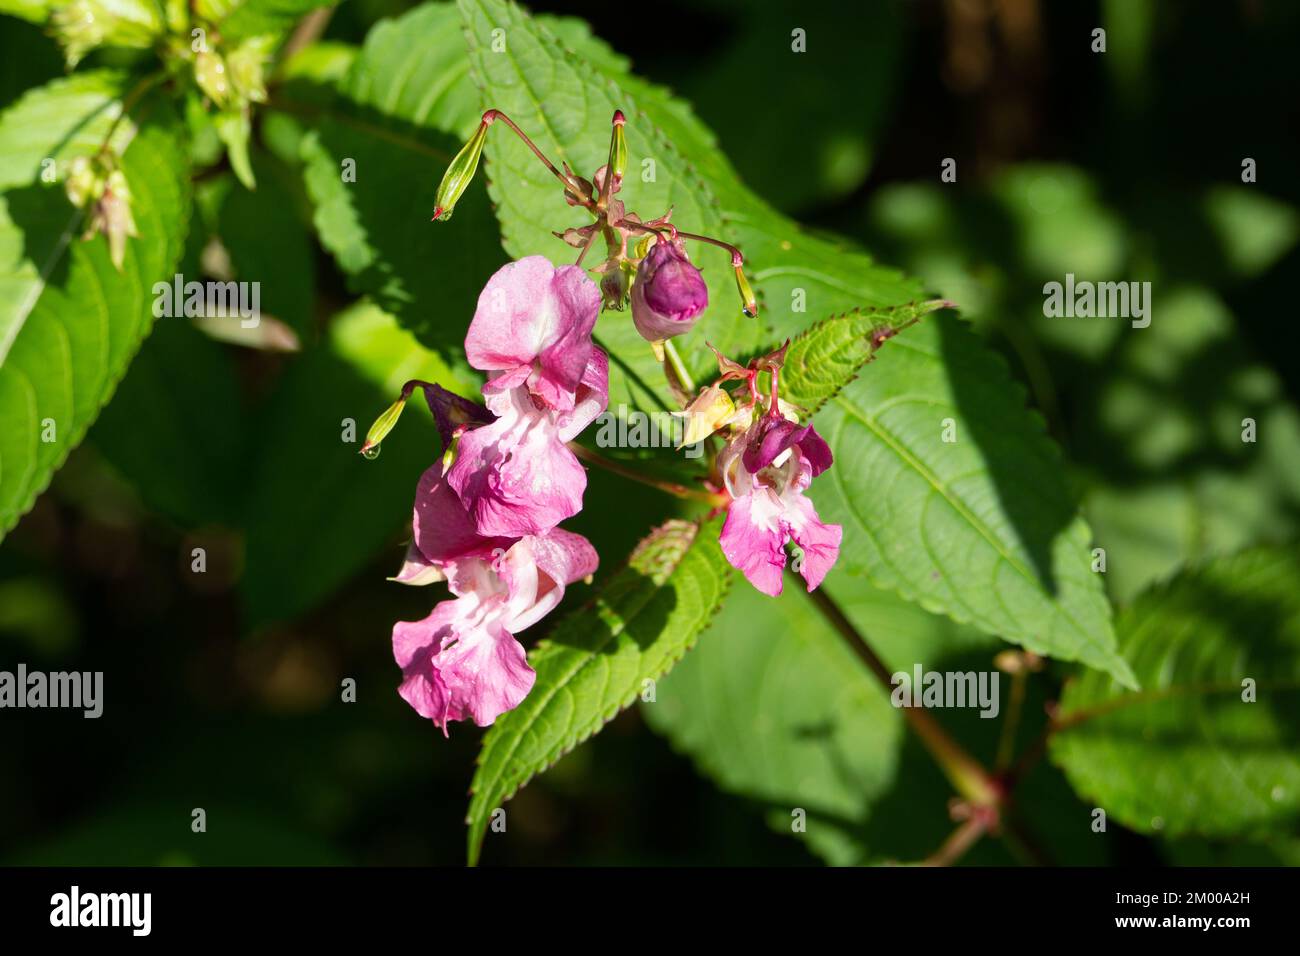 flowers and leaves of Himalayan balsam (Impatiens glandulifera) isolated on a natural green summer woodland background Stock Photo